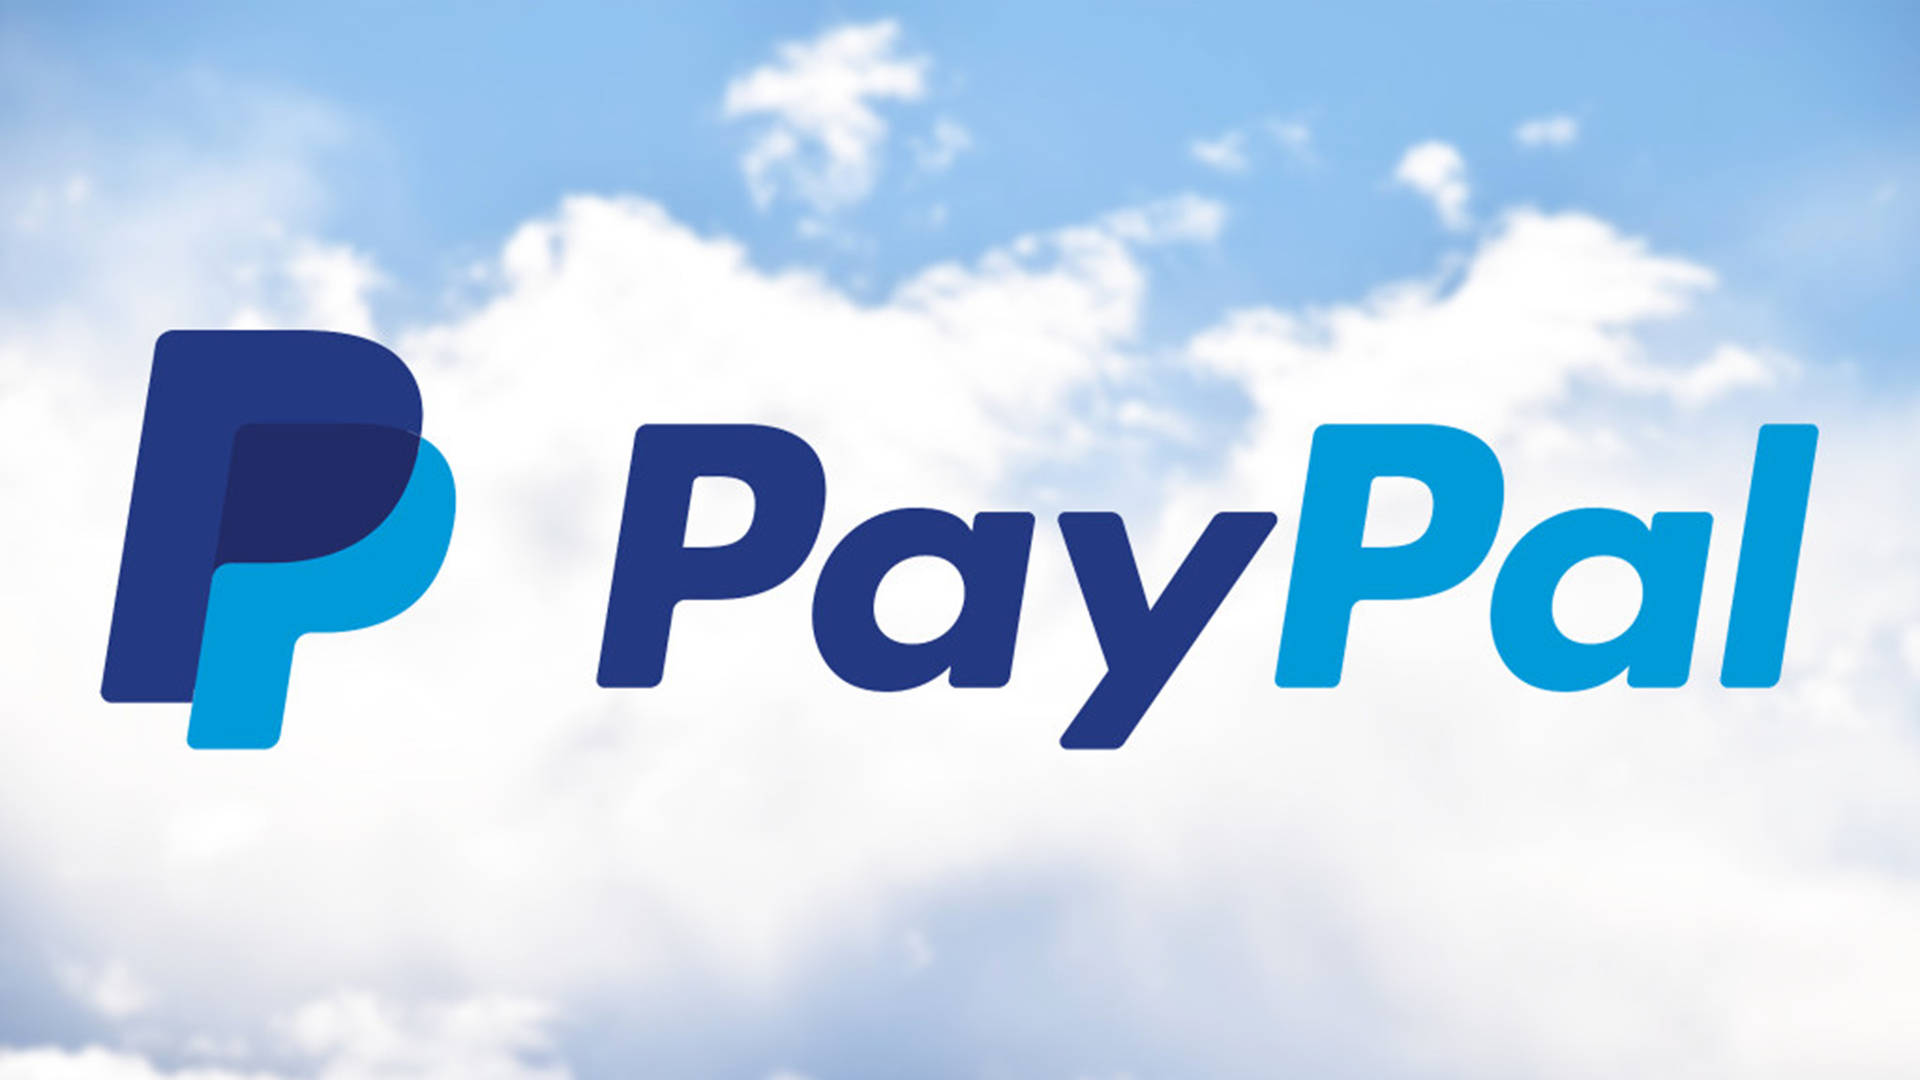 Paypal Logo With Clouds Wallpaper